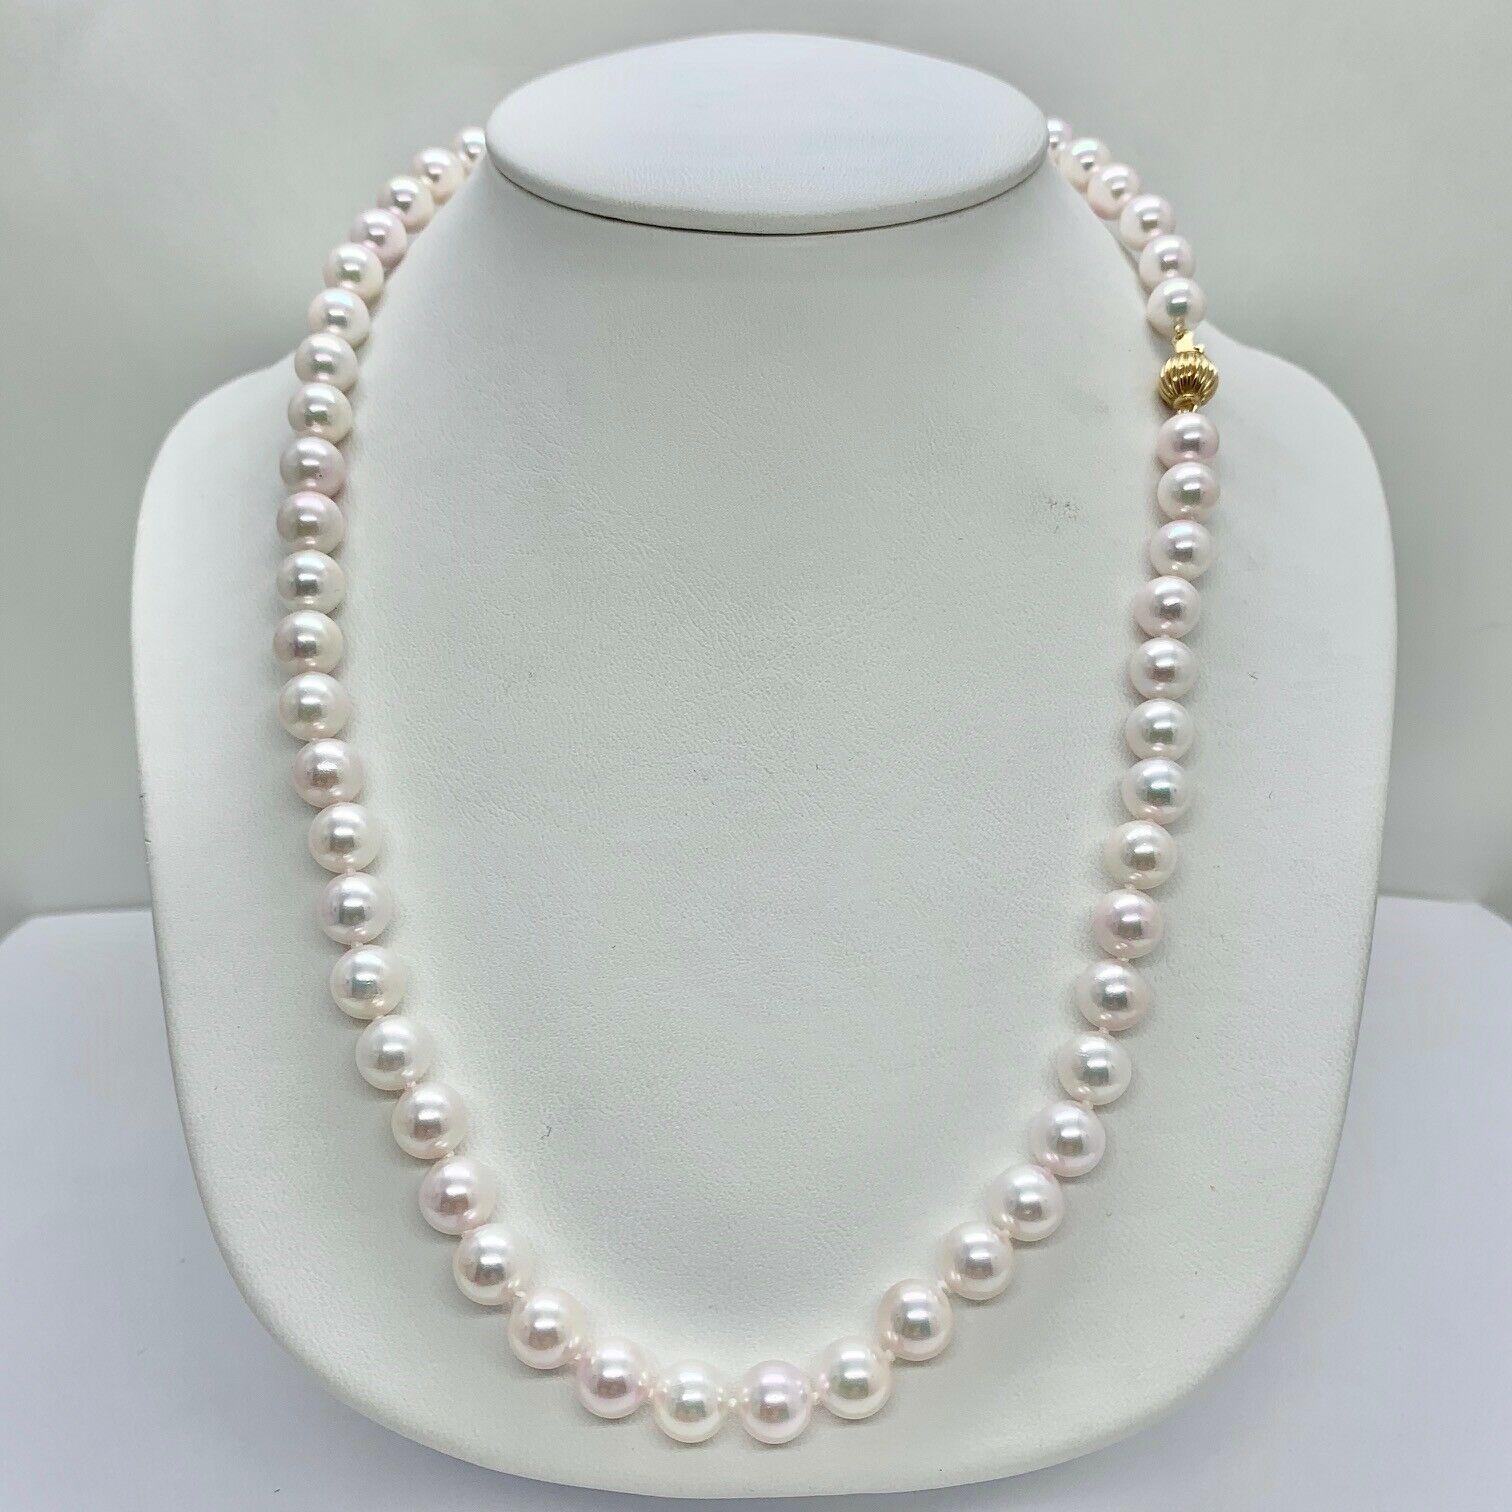 Certificate #201920208
Certified $3,950 Unique Hi Fashion Authentic Fine Quality Akoya White PEARL 14 KT Gold NECKLACE

This is a One of a Kind Unique Custom Made Glamorous Piece of Jewelry!!

Nothing says, “I Love ❤️ you” more than Diamonds and